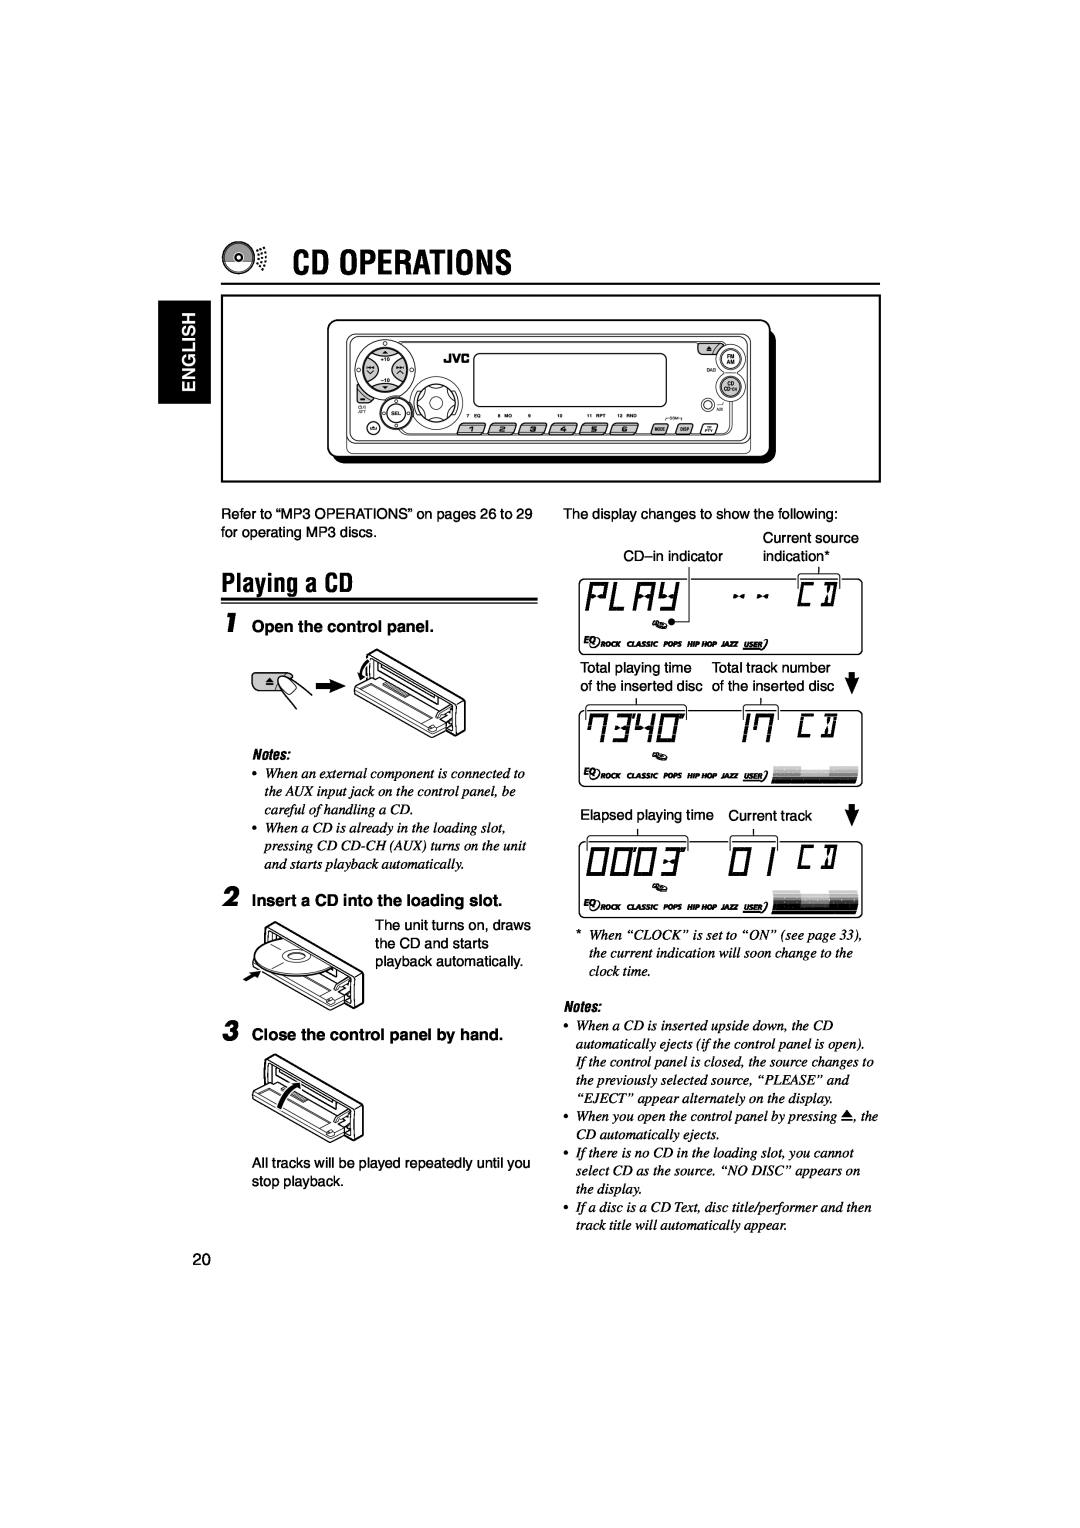 JVC GET0126-001A manual Cd Operations, Playing a CD, Open the control panel, Insert a CD into the loading slot, English 